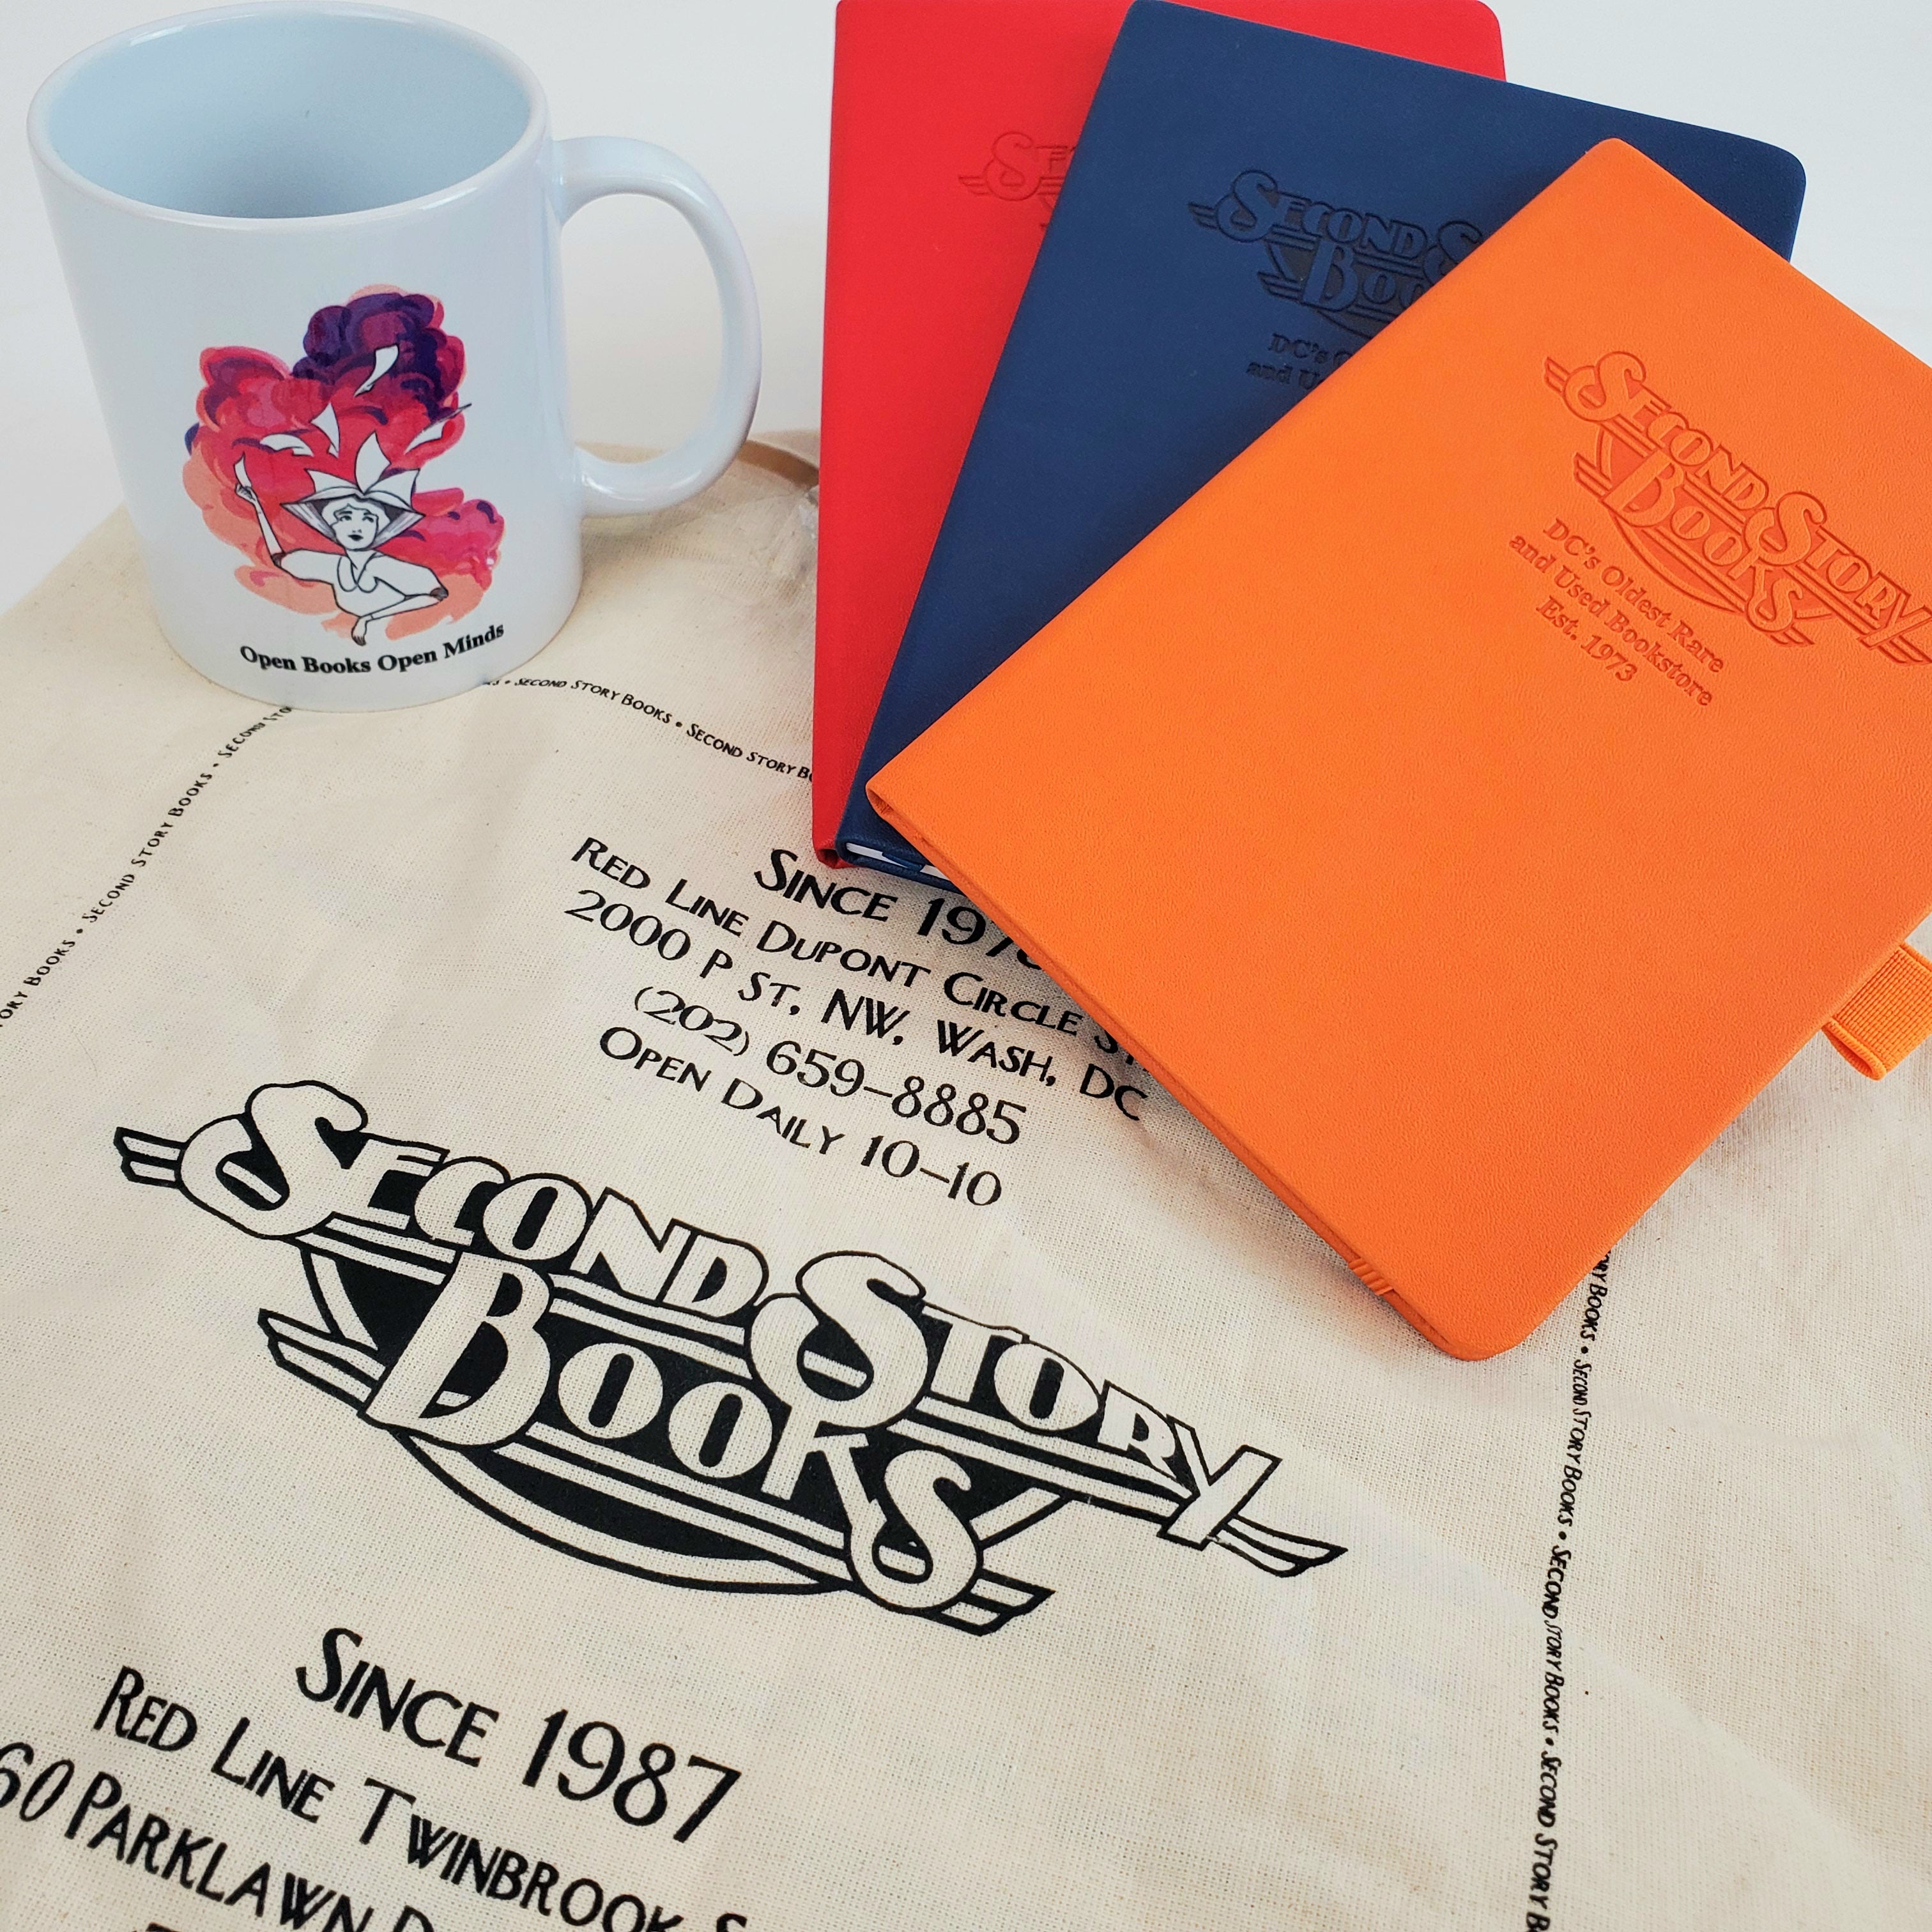 Second Story Coffee Mugs, Journals and Canvas Bags